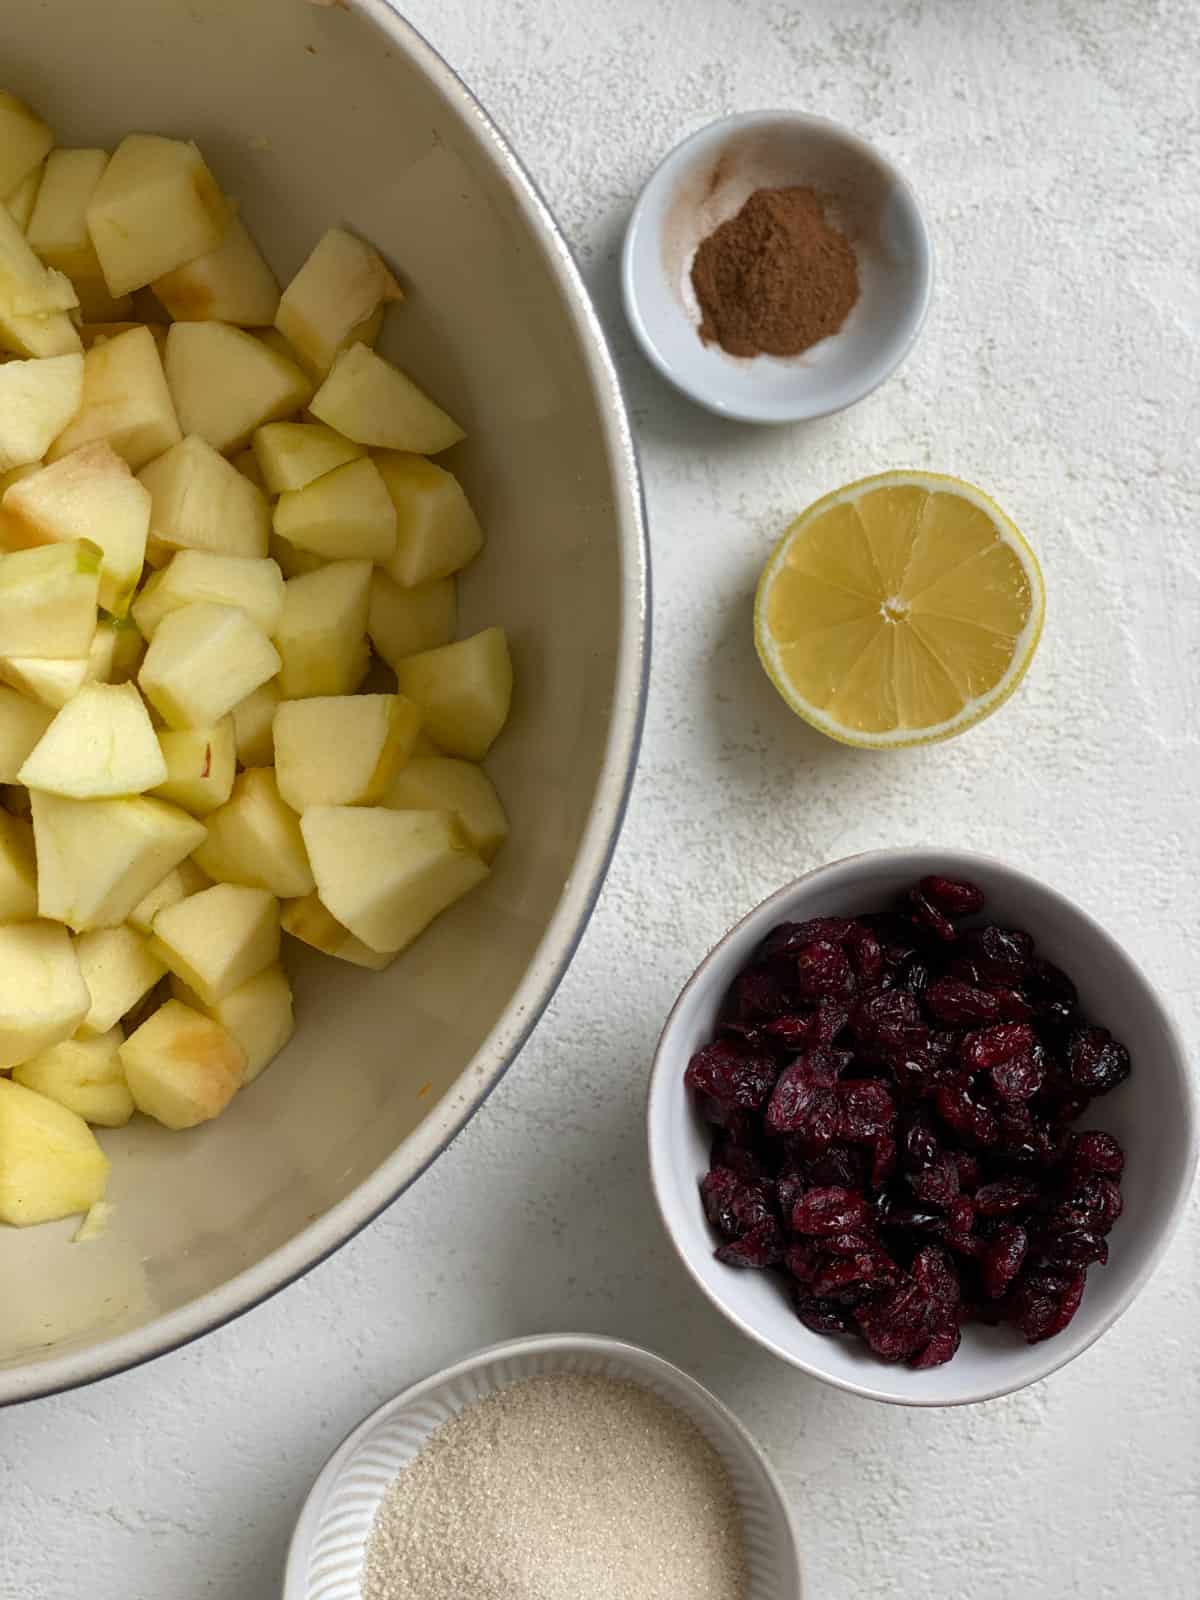 ingredients for Apple Cranberry Crisp measured out against a white surface